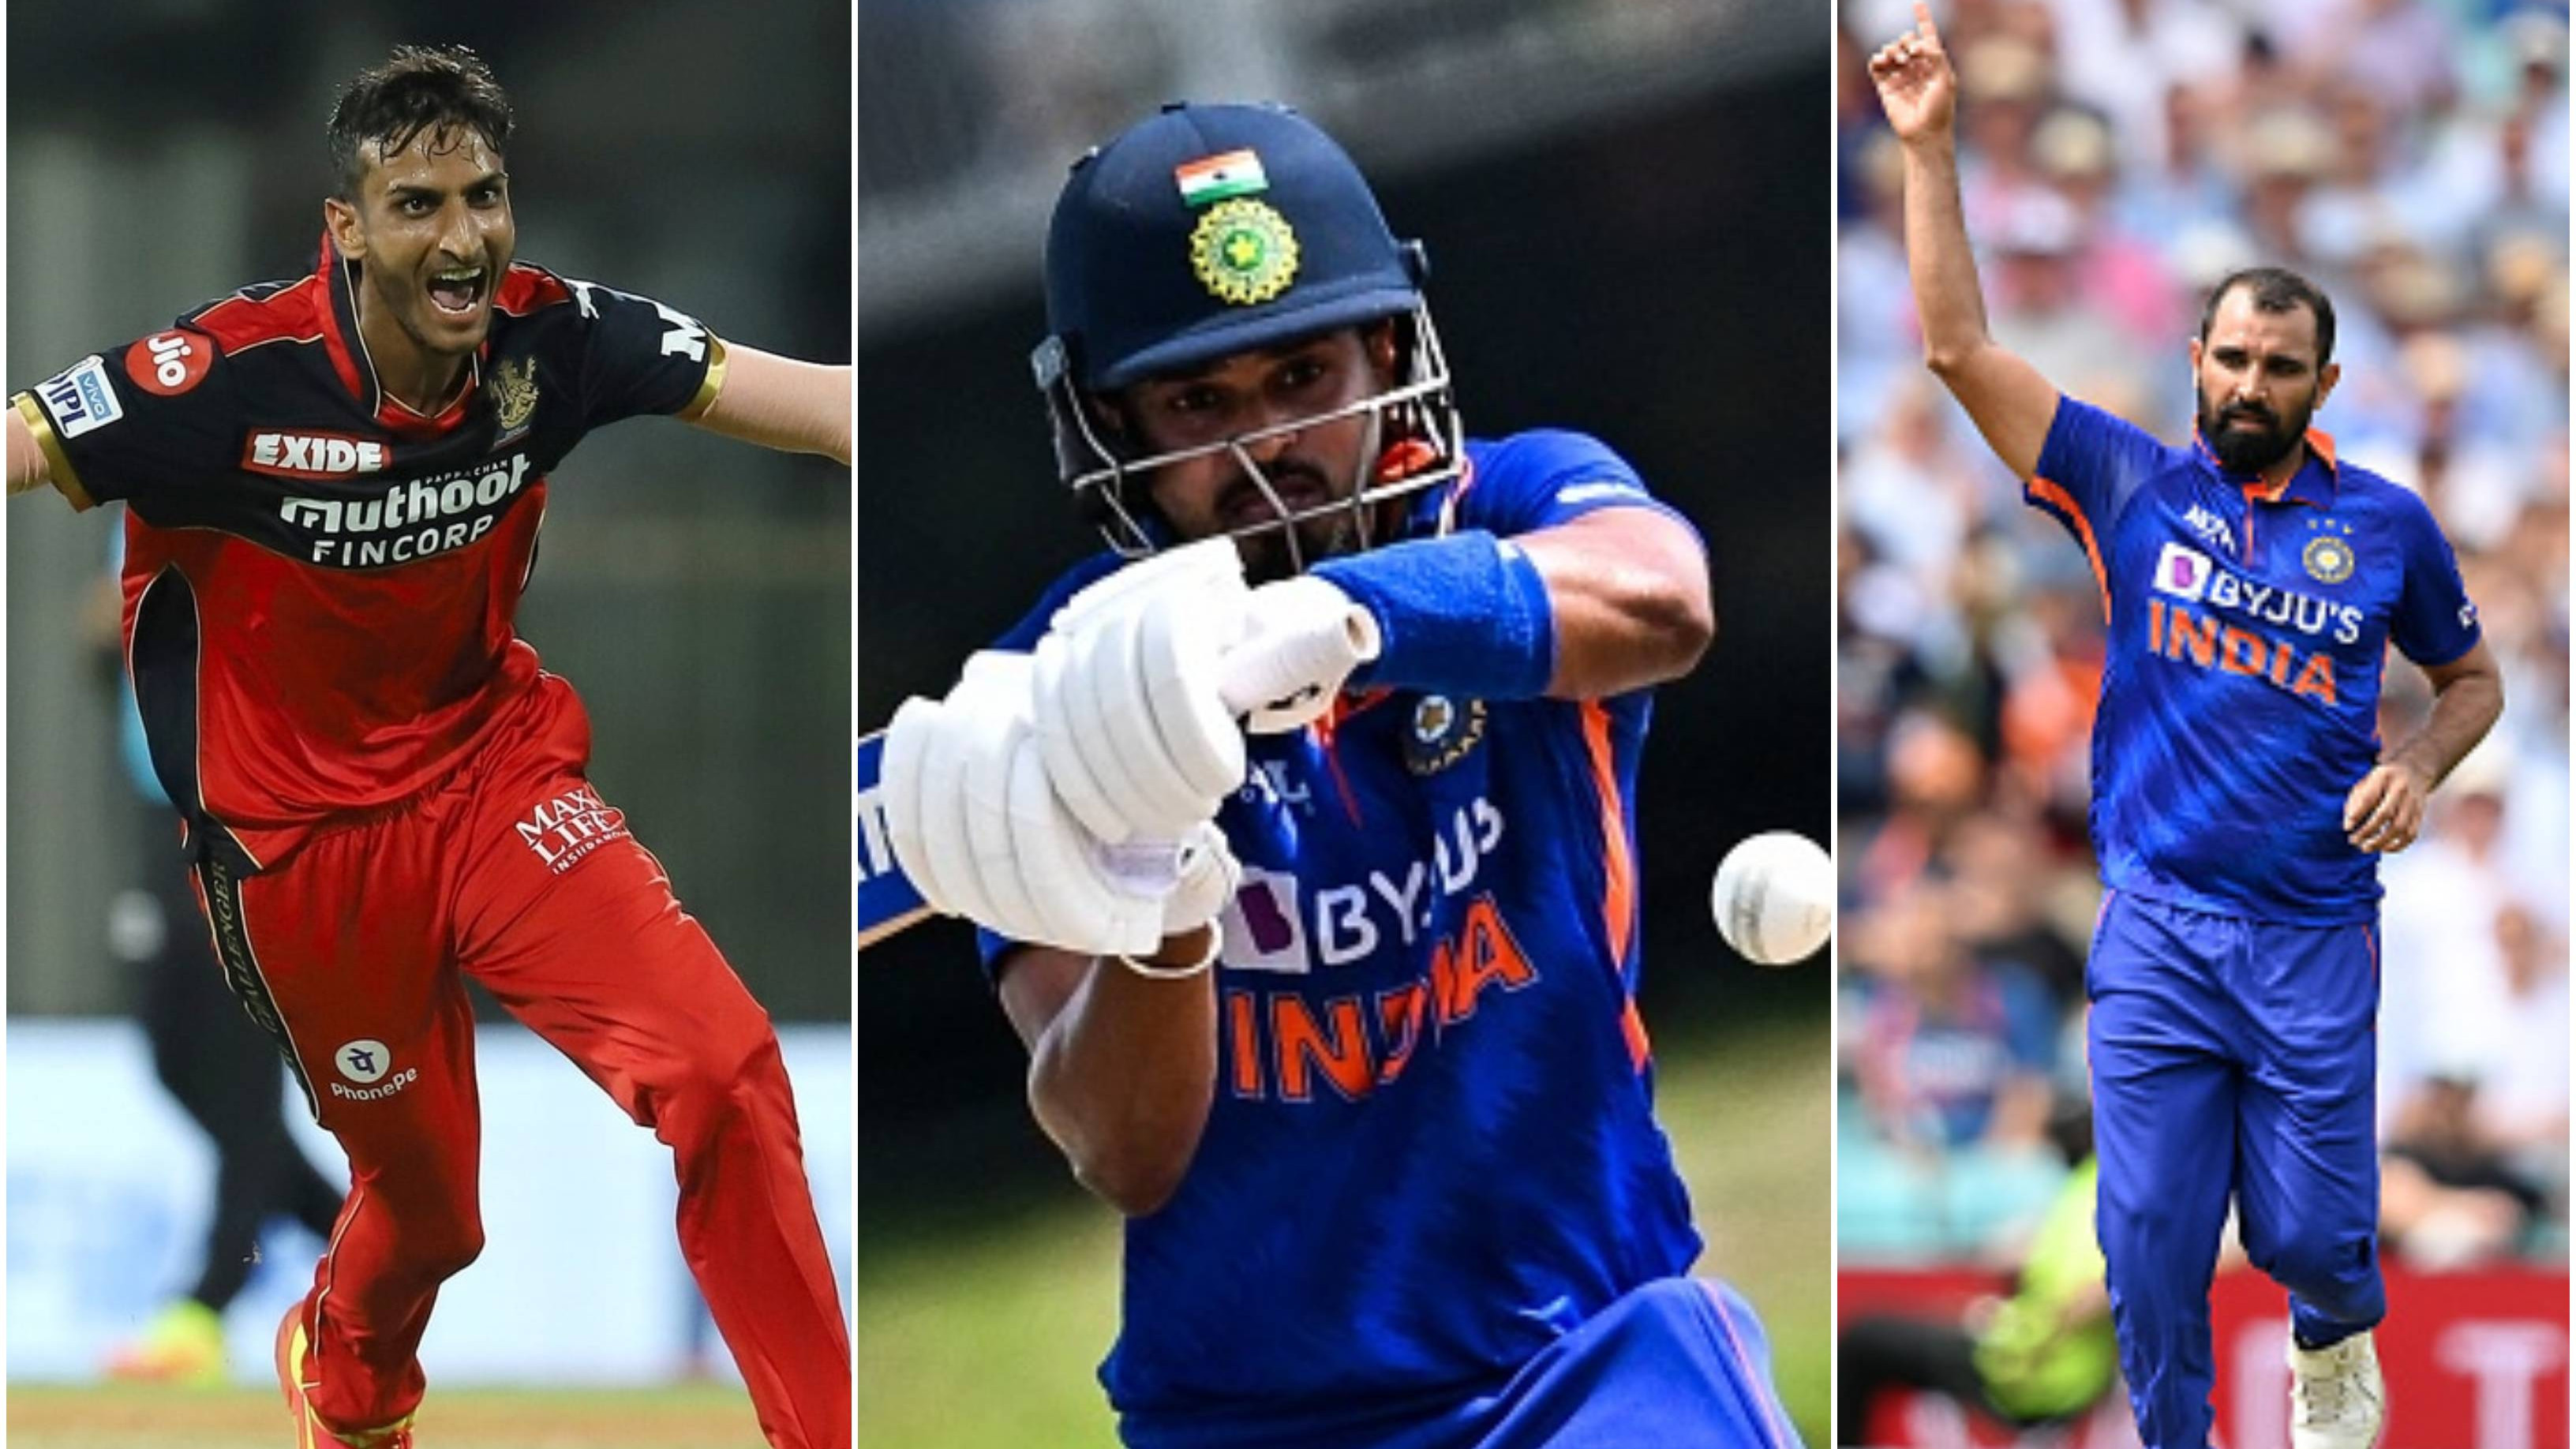 IND v SA 2022: Shahbaz Ahmed, Shreyas Iyer included in T20I squad; Shami yet to recover from COVID – Report